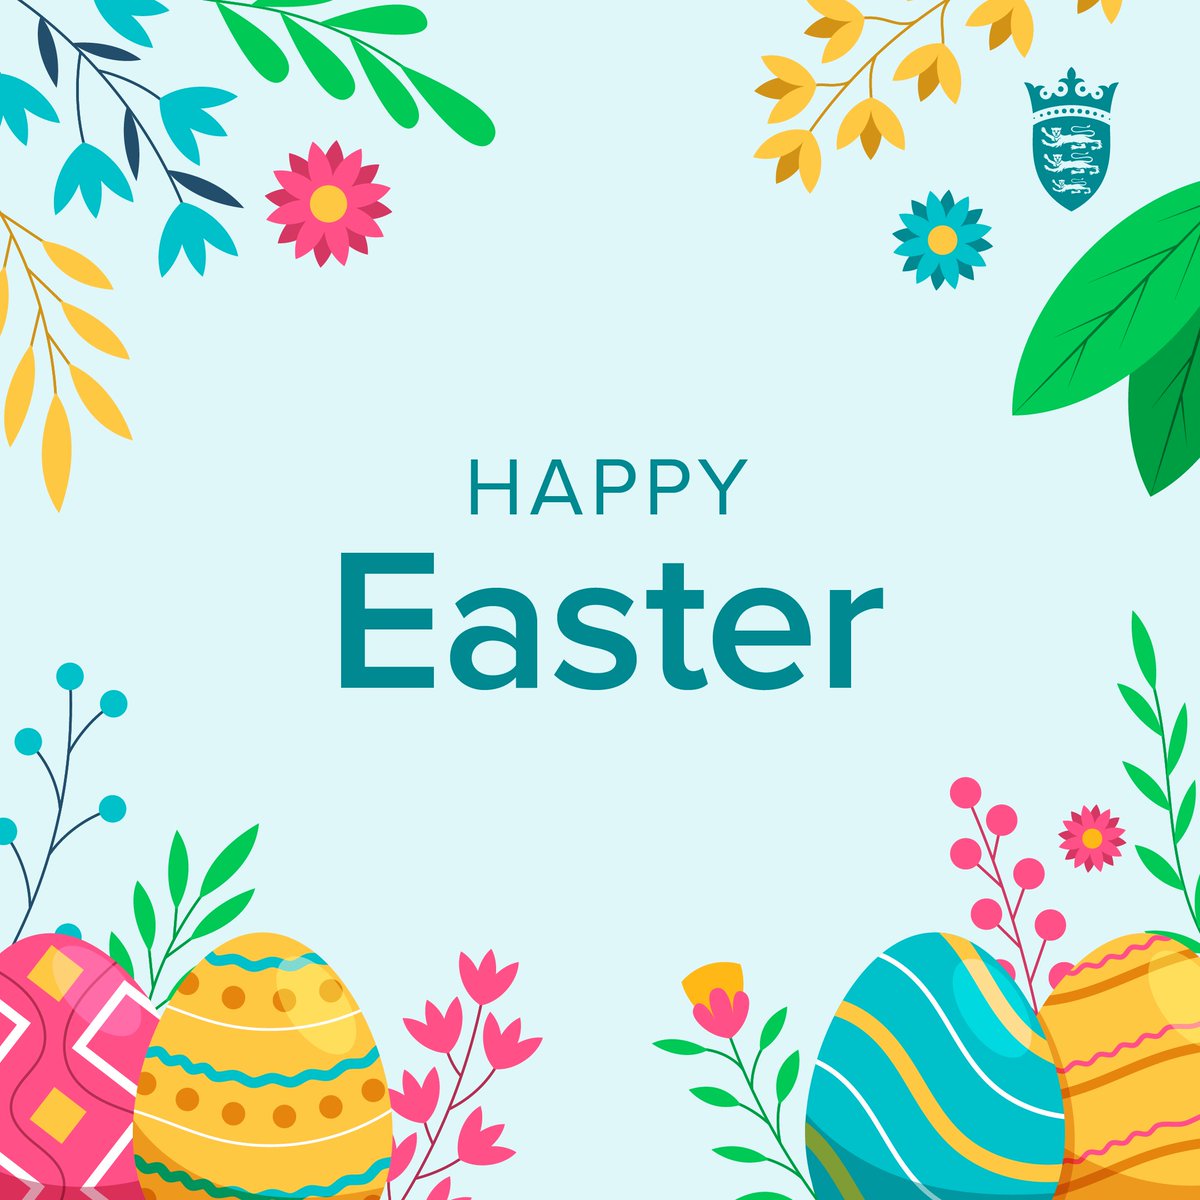 Happy Easter 🐰🌷🐣 Let's celebrate this special day by spreading kindness and positivity in our community. Have a wonderful Easter Sunday with your loved ones, in person or virtually. 🌸🍫